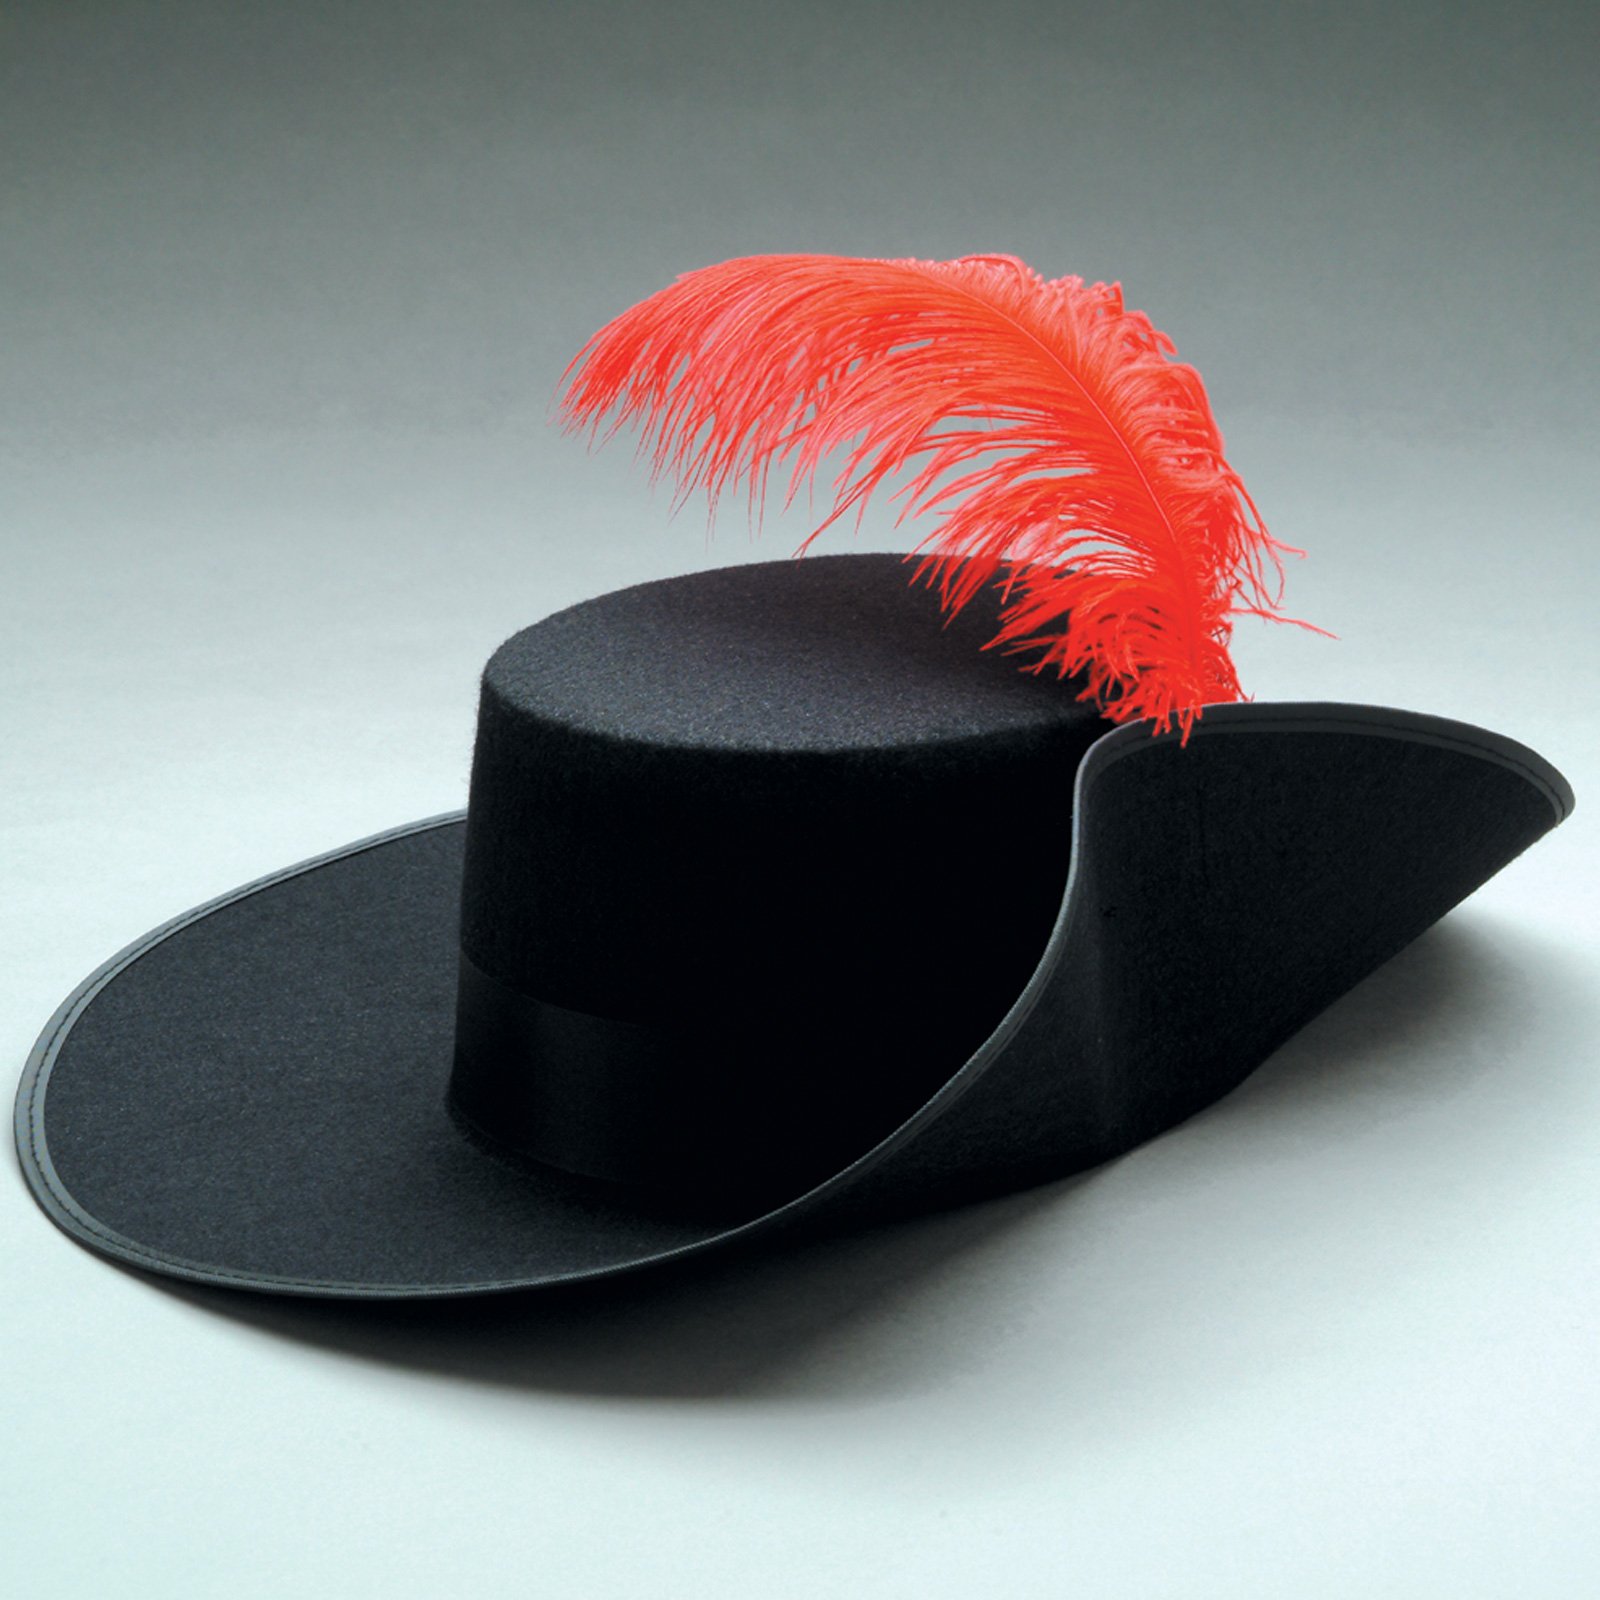 Http - //4 - Bp - Blogspot - Caps Pictures Wallpapers - Feather In A Hat - HD Wallpaper 